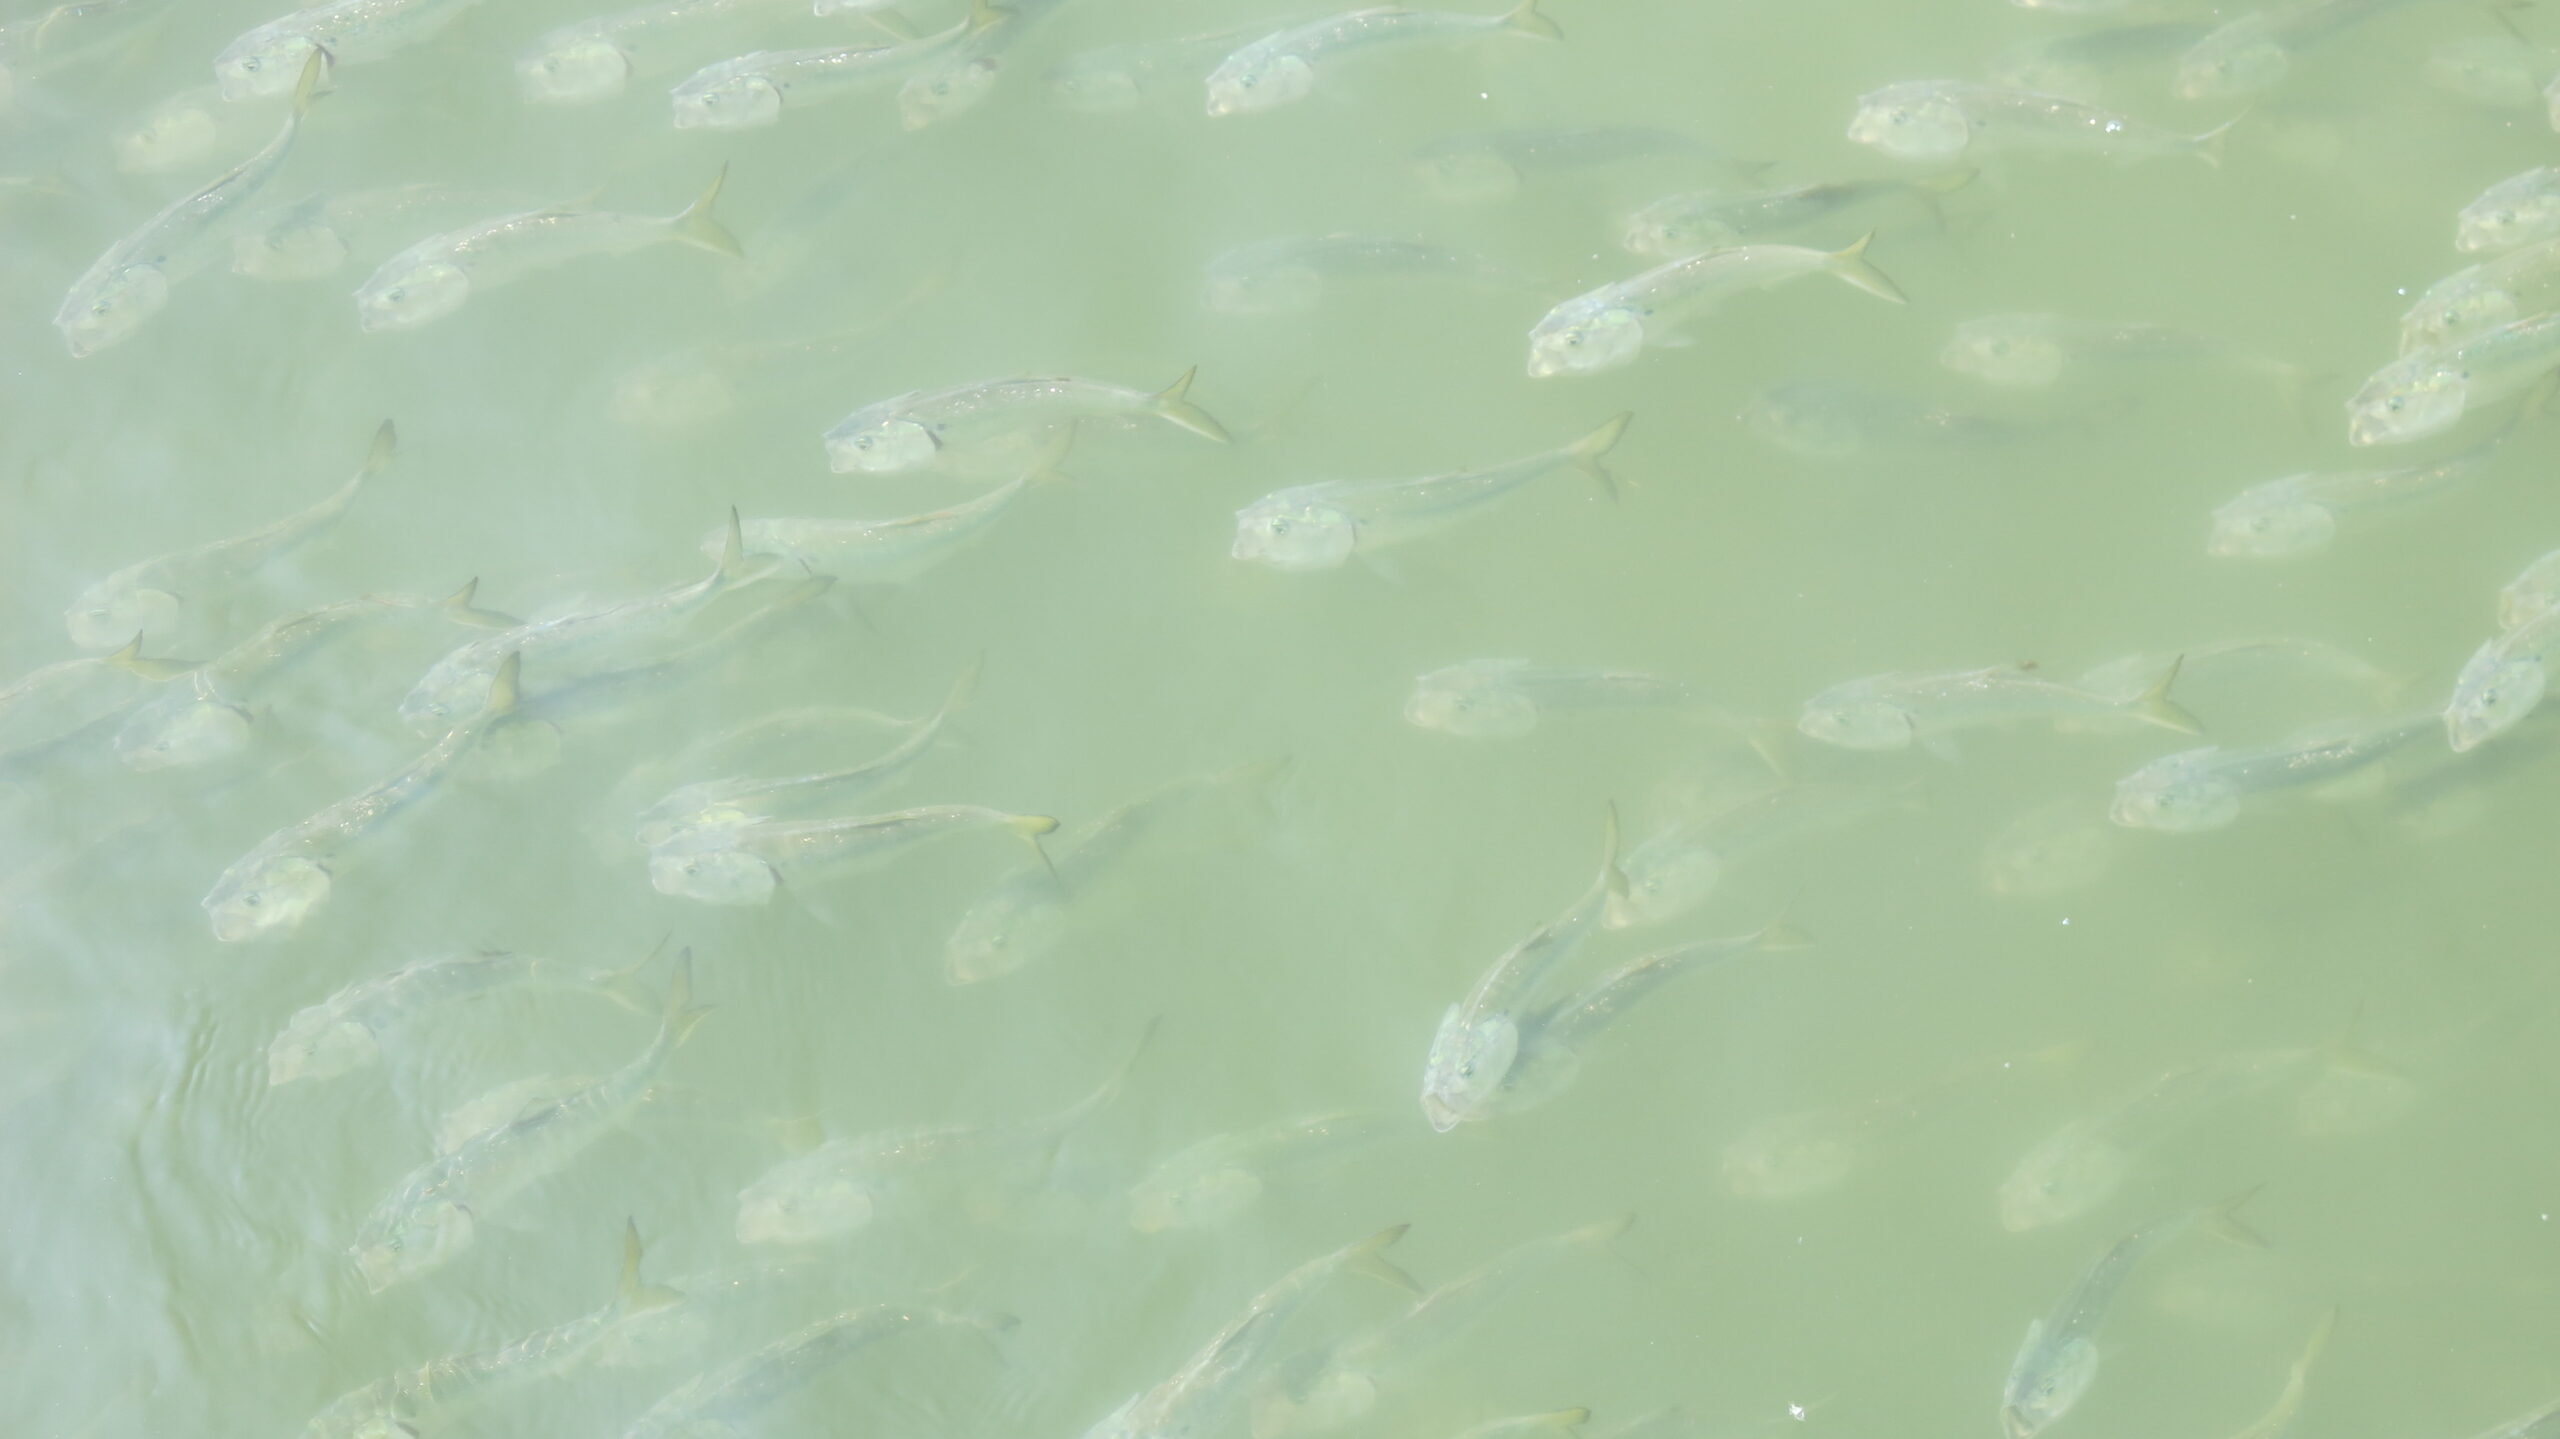 School of American Shad Fish in the River